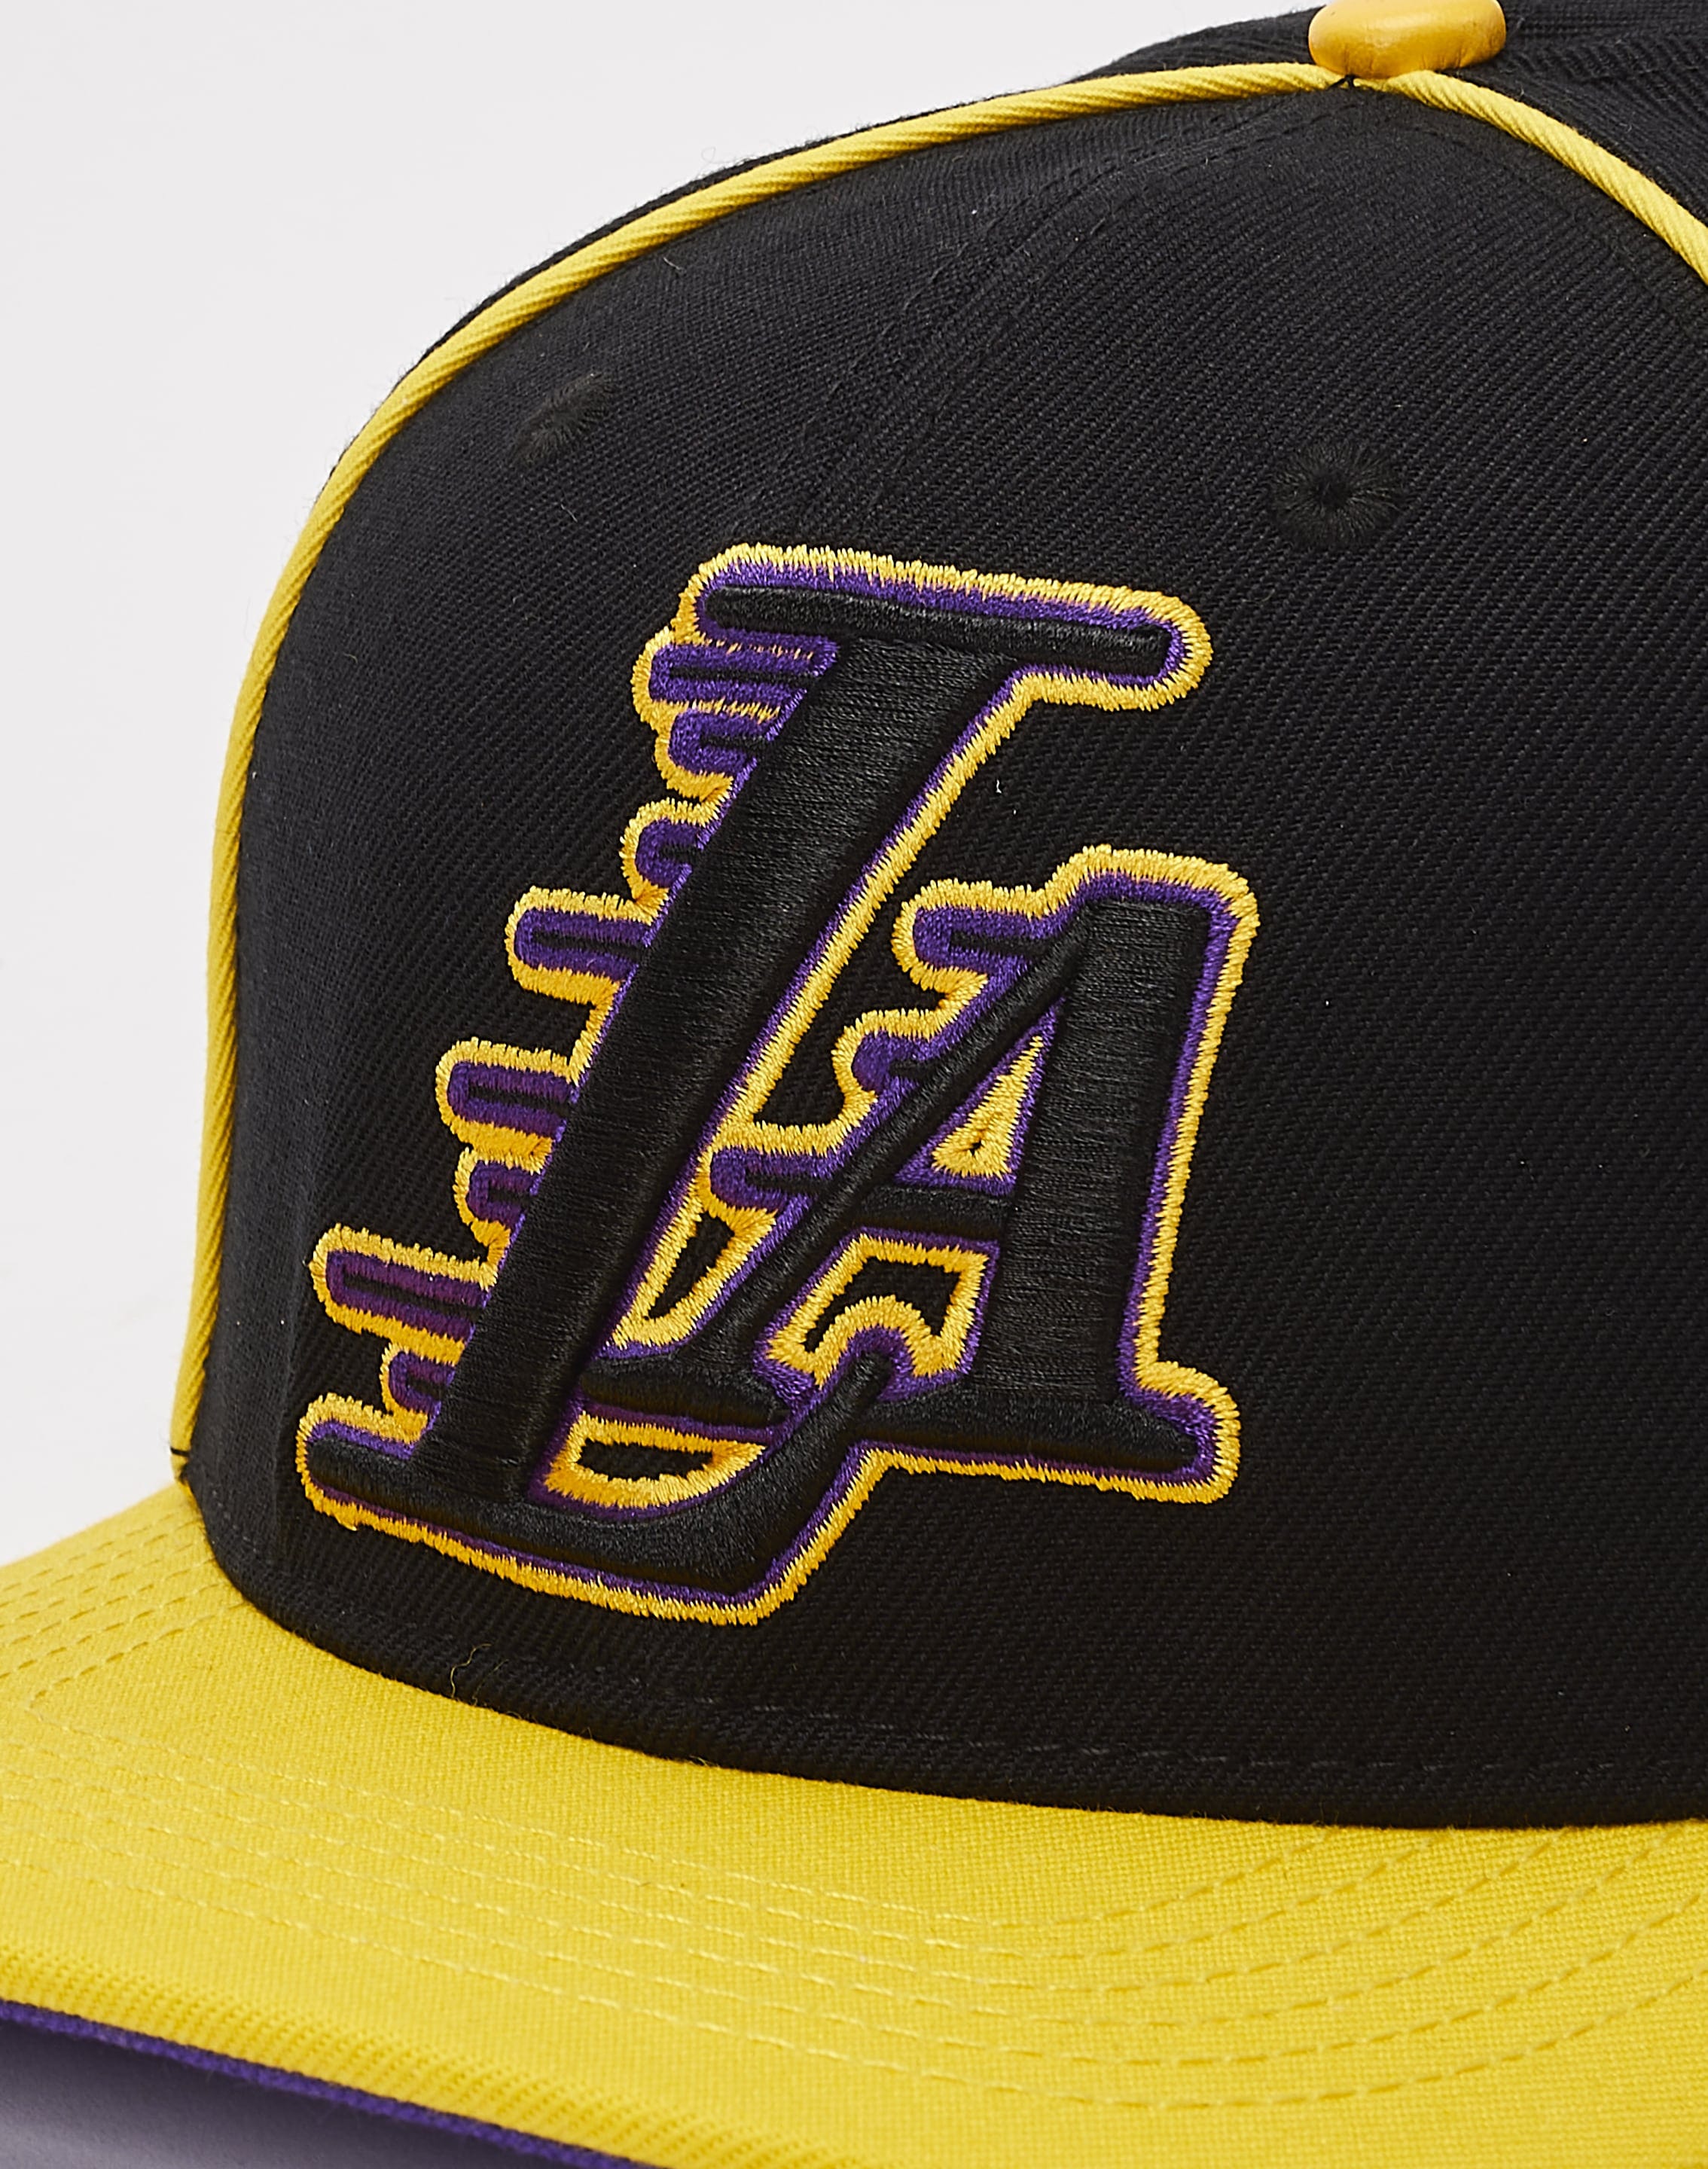 Pro Standard Los Angeles Lakers 17X Champs Snapback Hat – DTLR